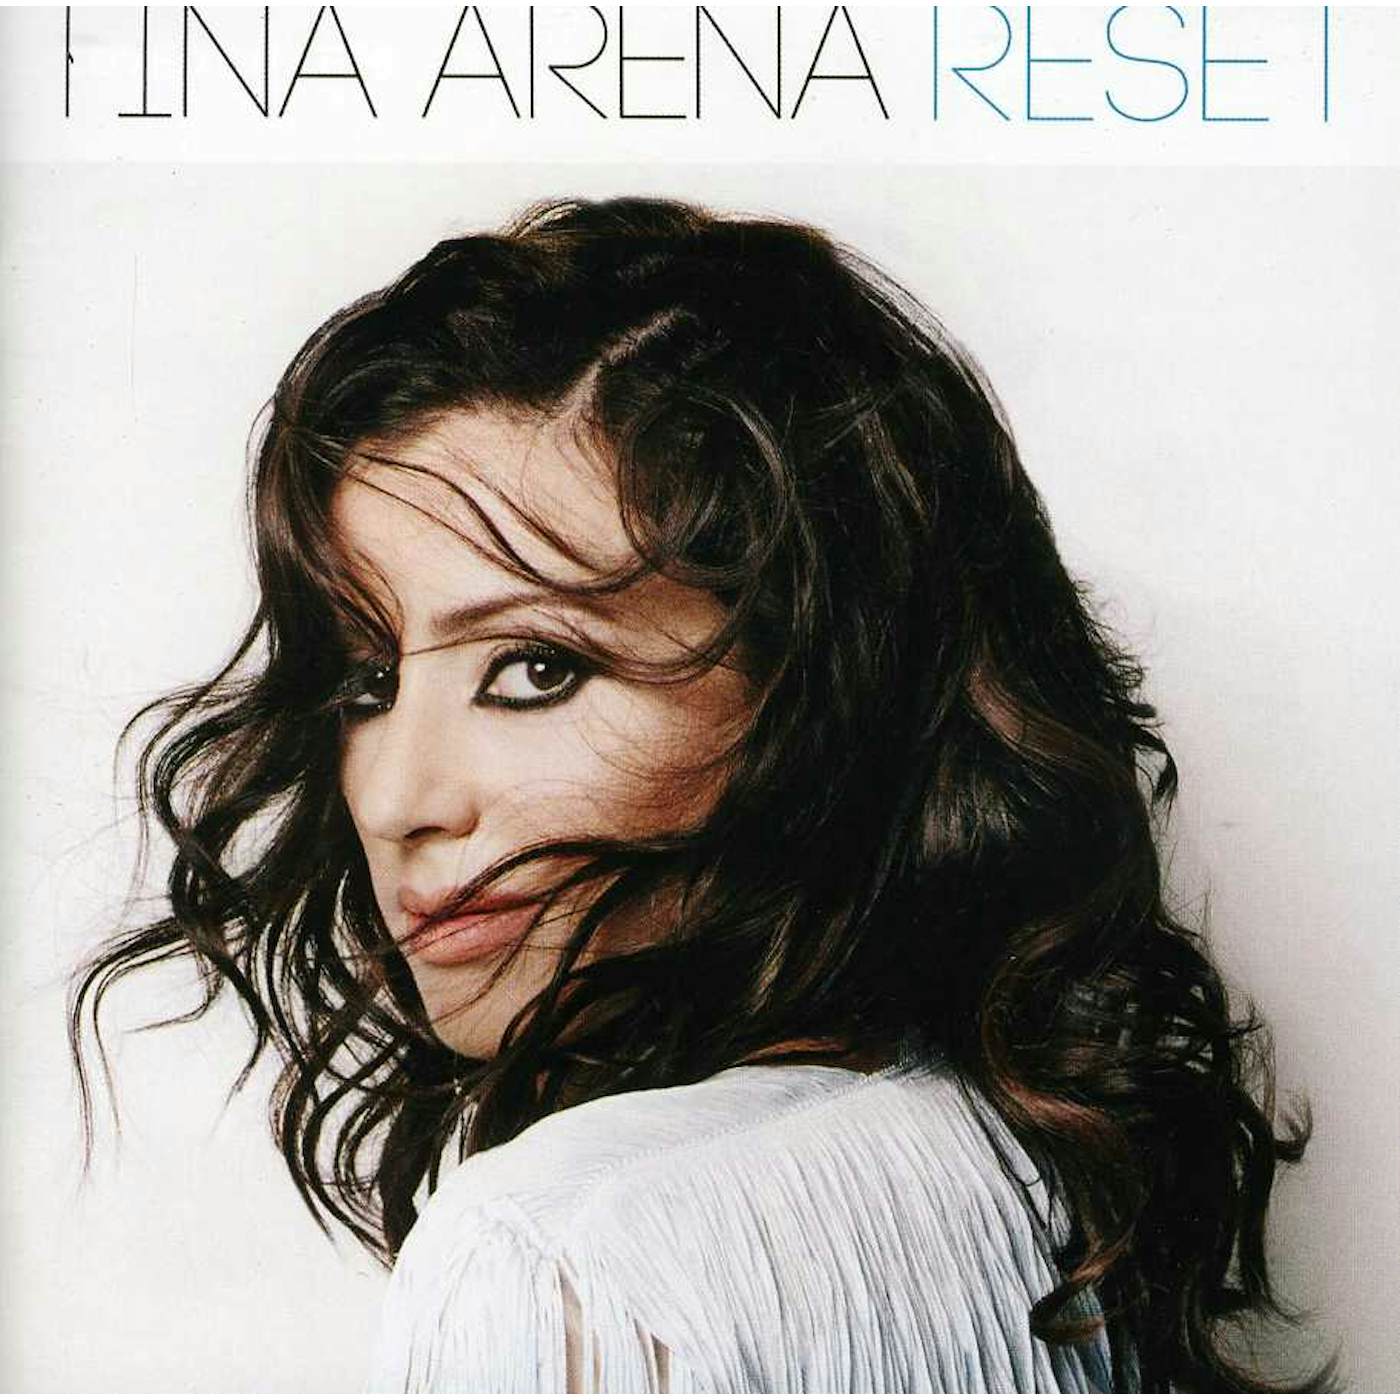 Tina Arena RESET (DELUXE EDITION) CD